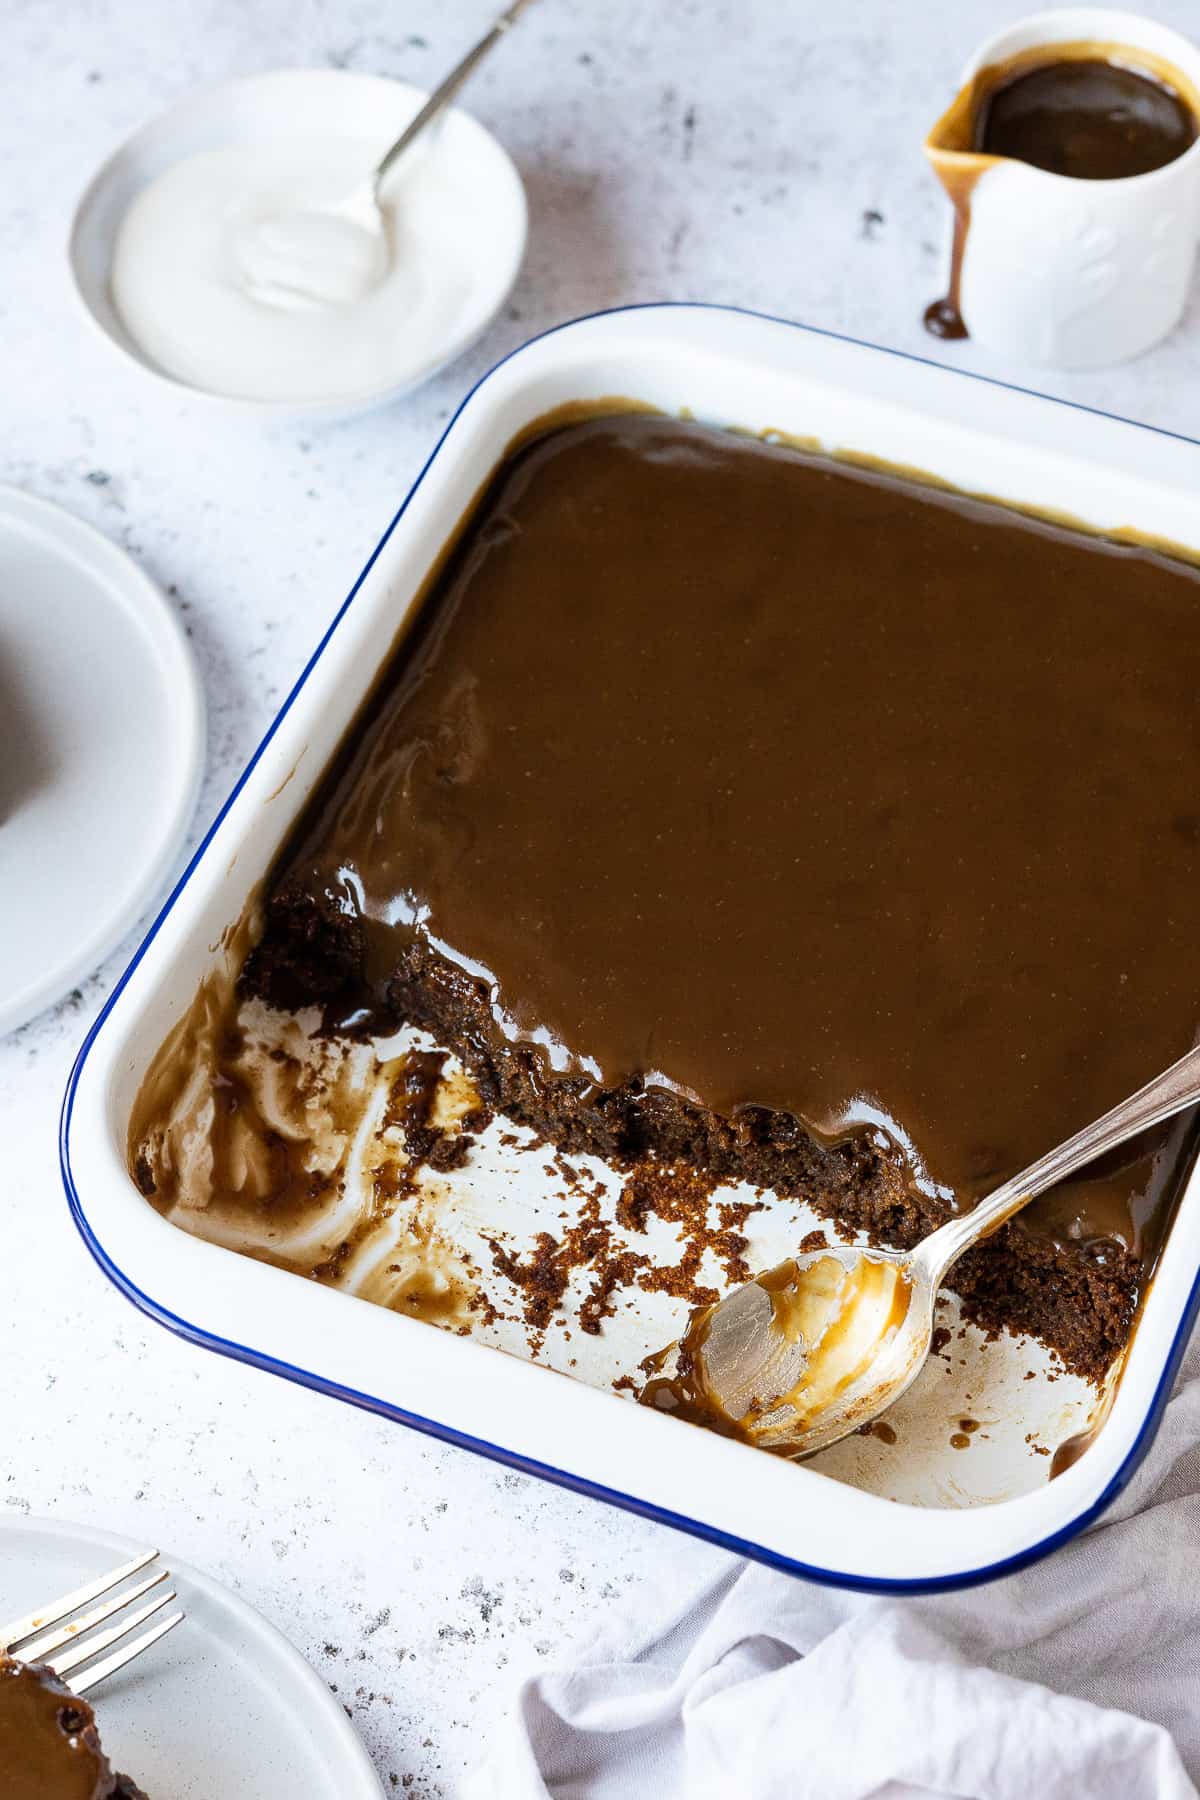 Sticky toffee pudding in a white enamel dish on a white background with a jug of sauce and a bowl of cream.